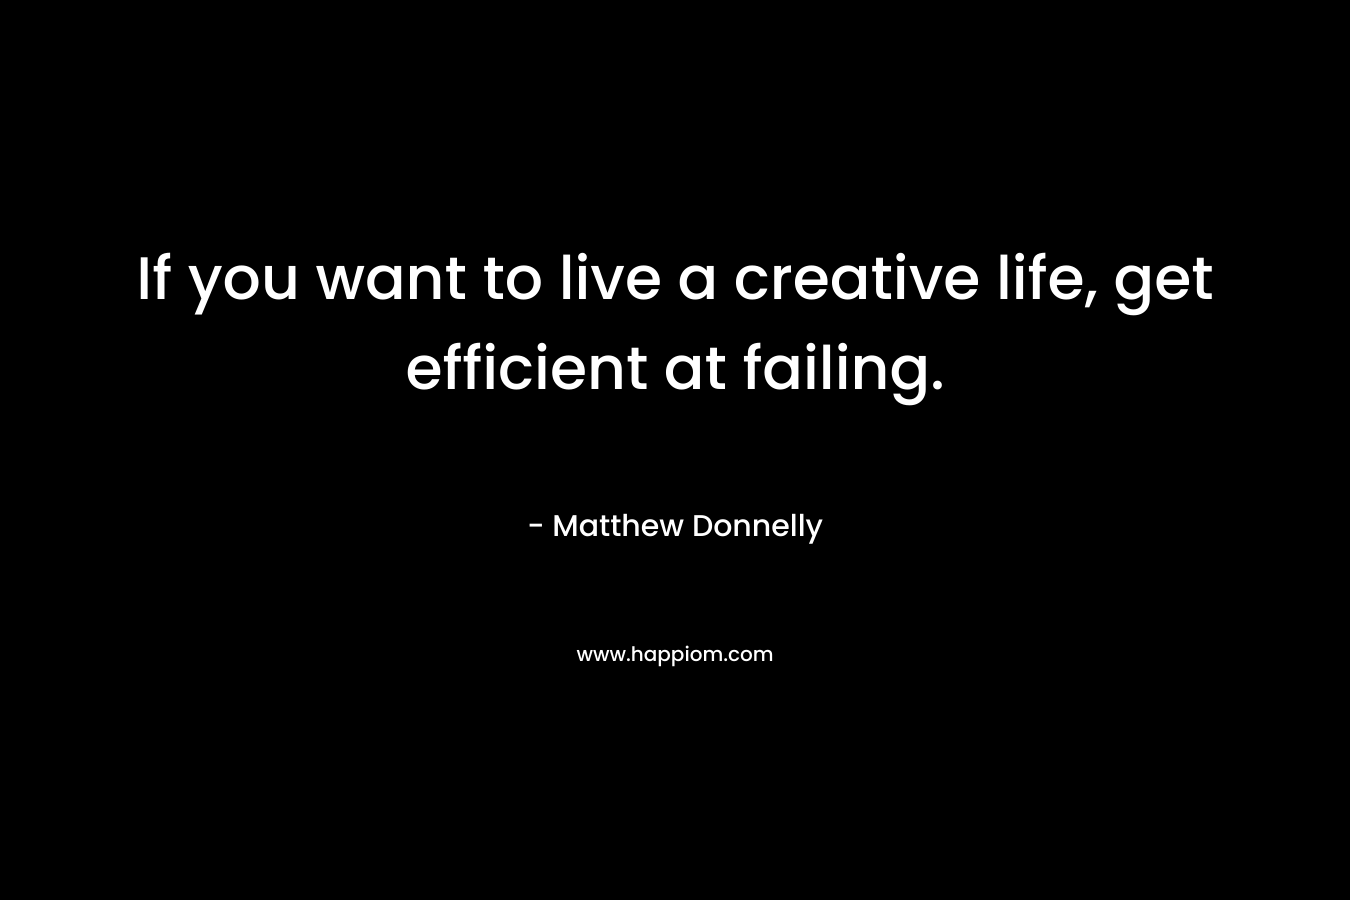 If you want to live a creative life, get efficient at failing.